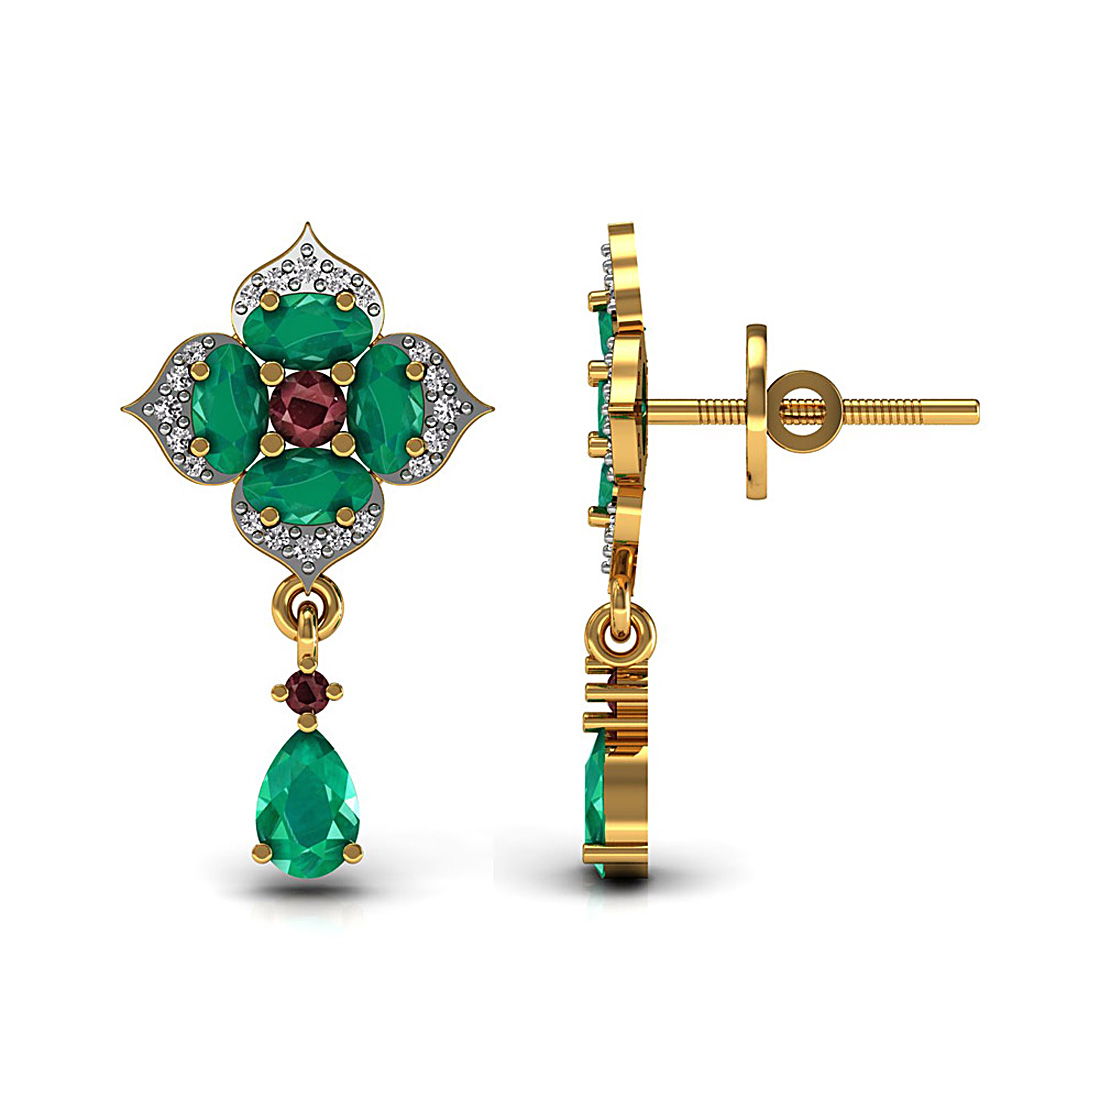 Diamond dangle drop earrings adorned with natural emerald and ruby gemstone made in 18k solid yellow gold.